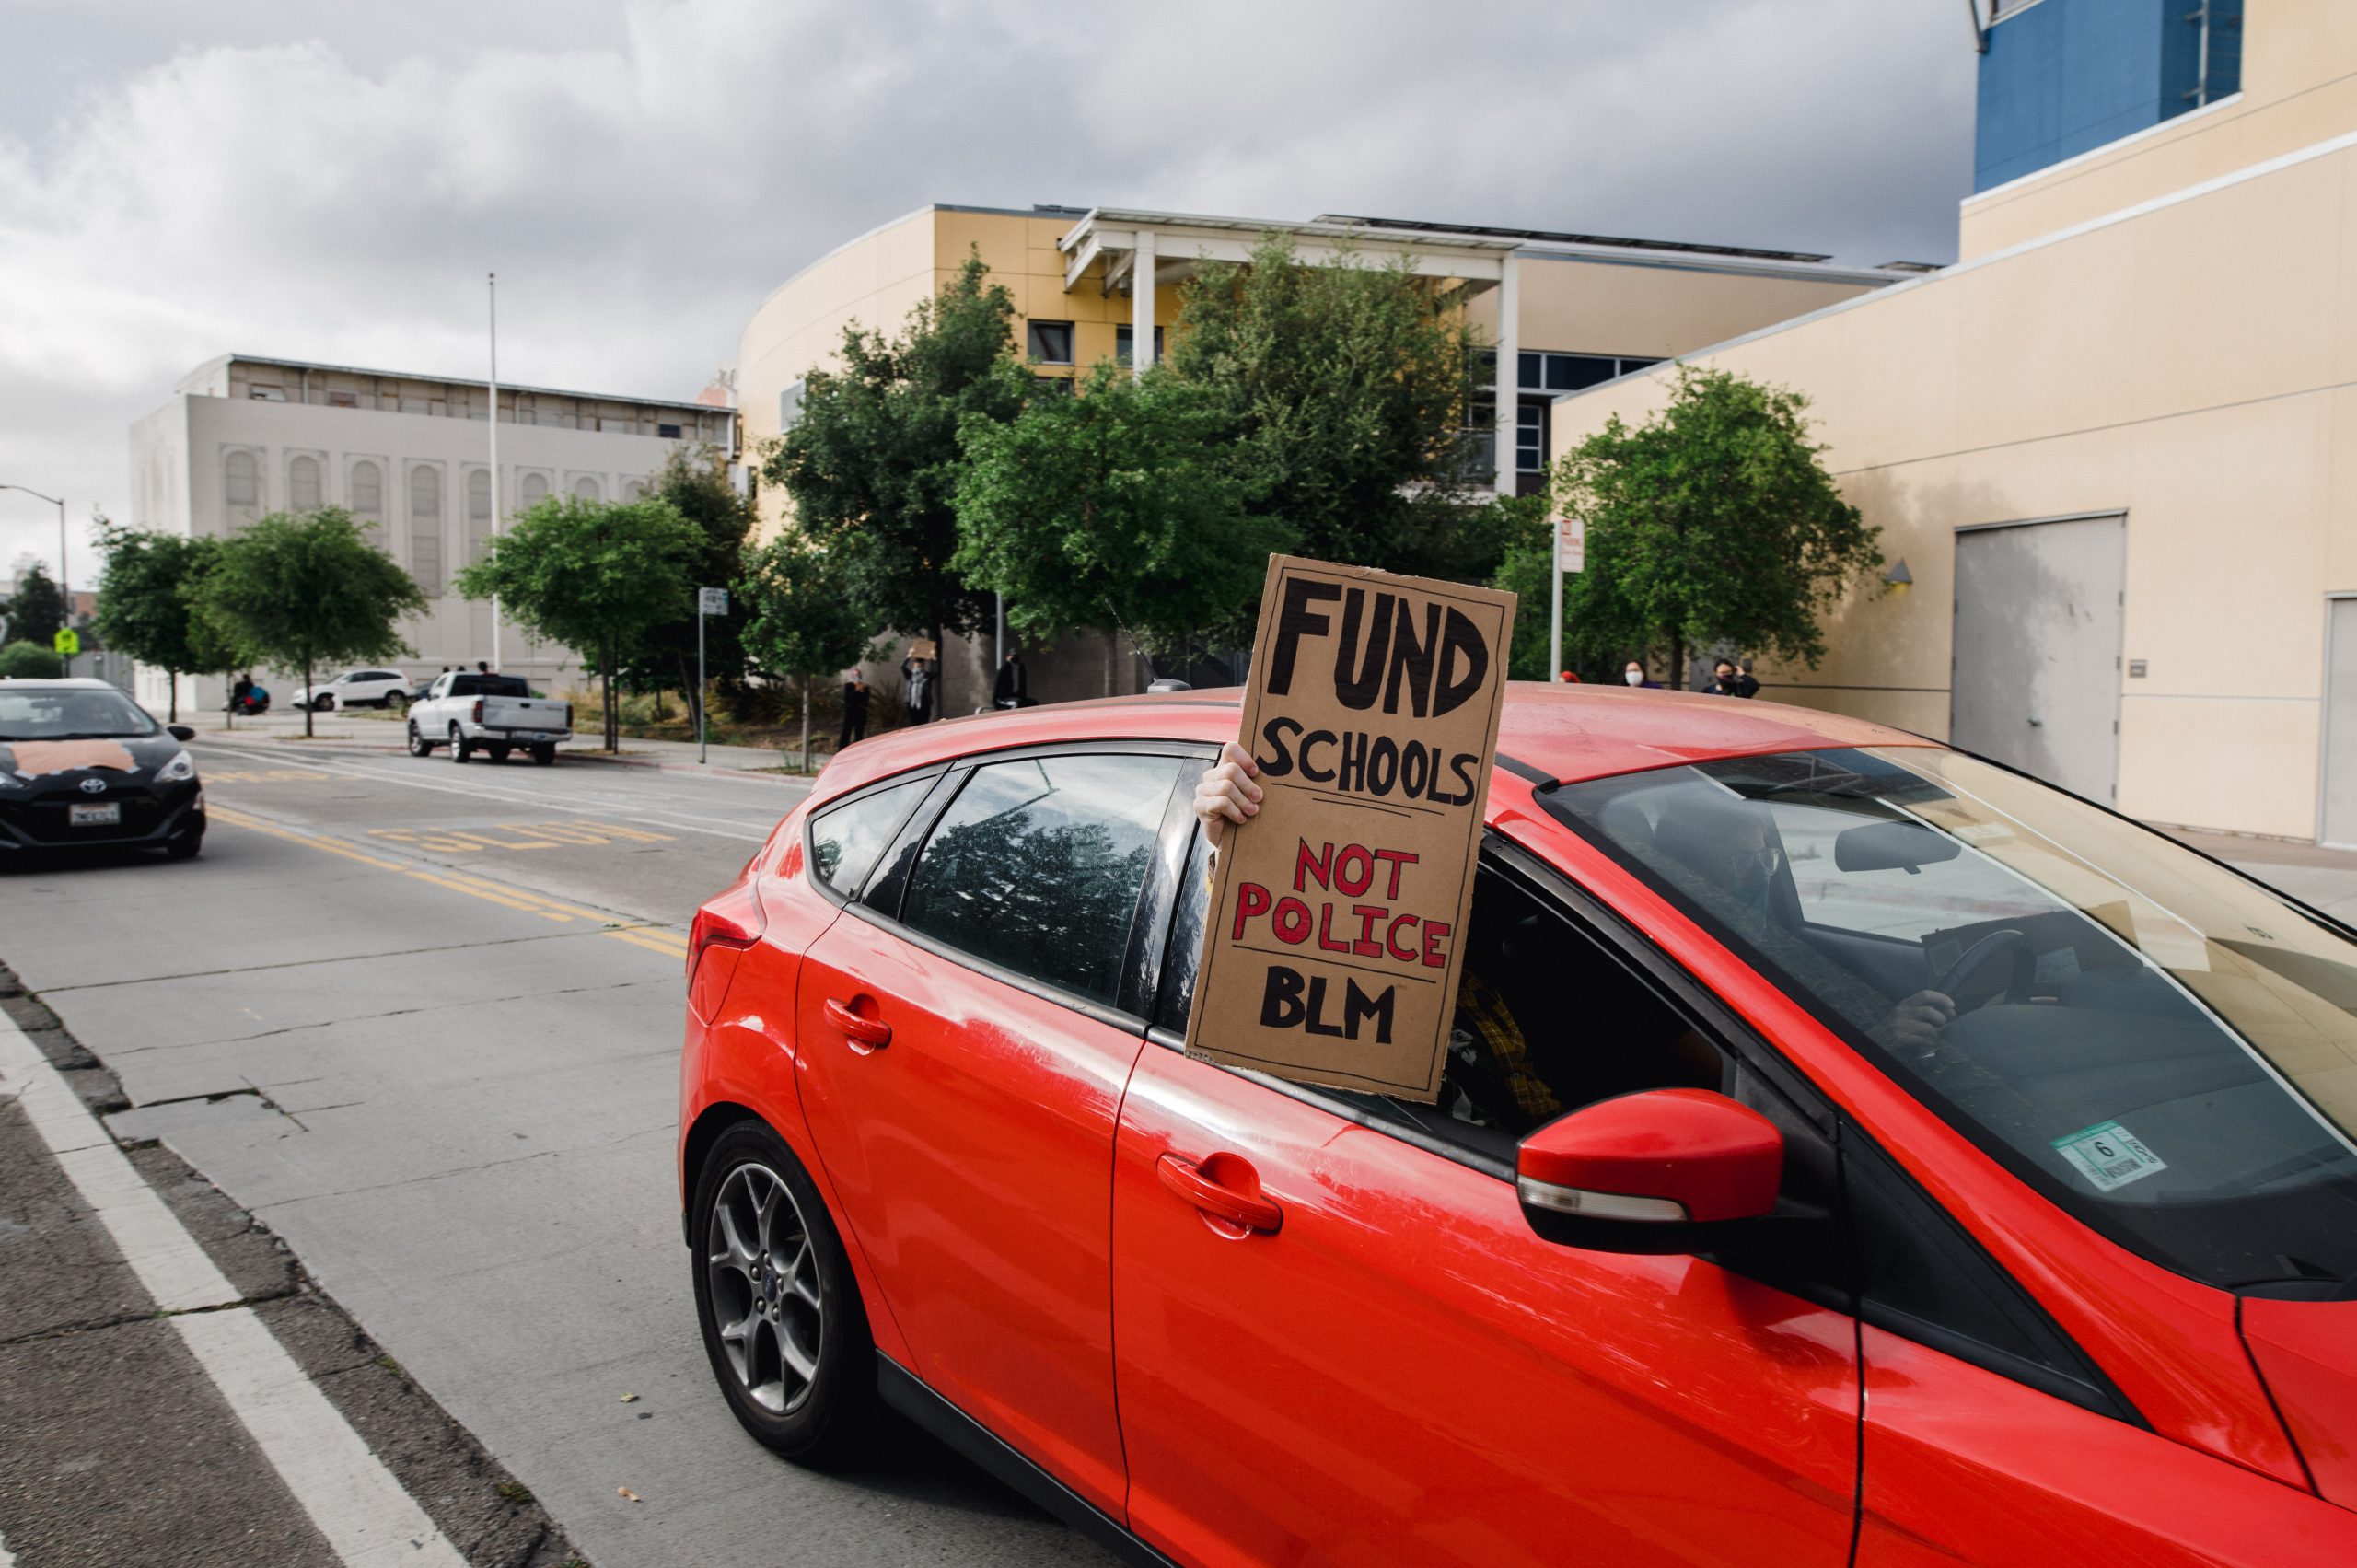 A red car has the window open. A hand is holding a homemade cardboard sign that says "Fund Schools Not Police BLM"